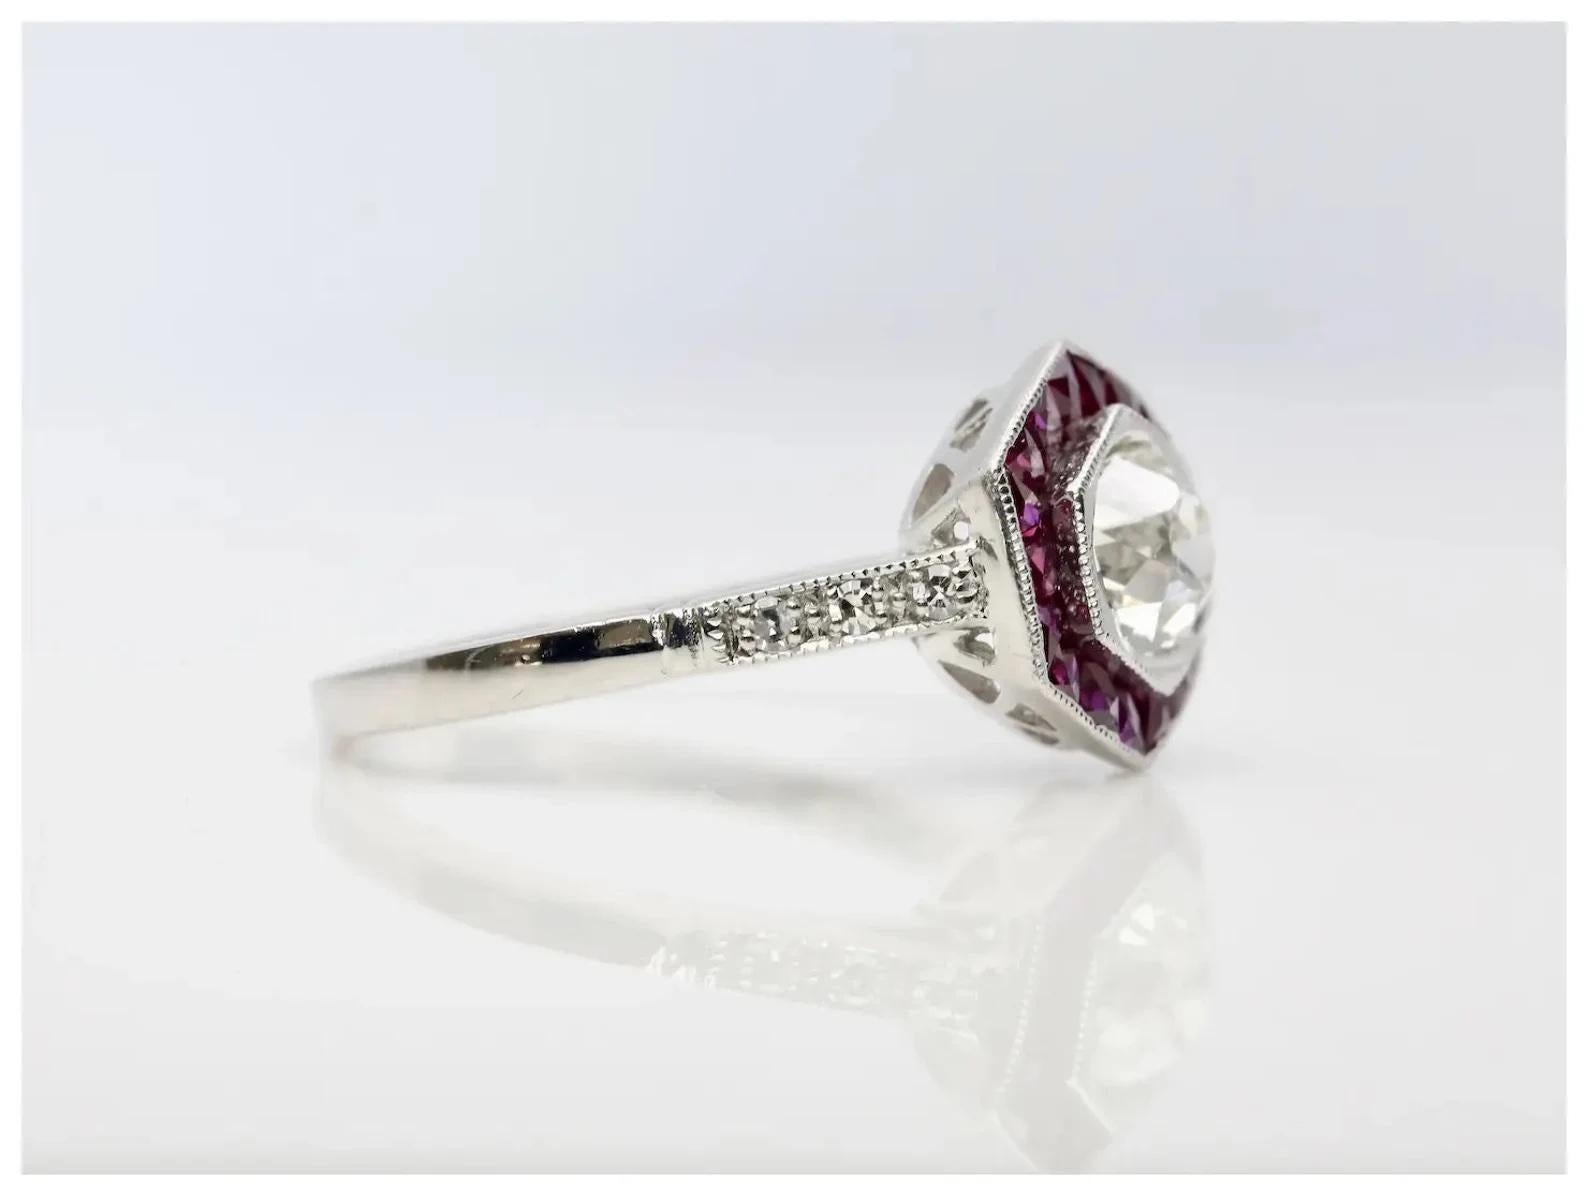 An Art Deco style diamond, and French cut ruby engagement ring in platinum.

Centered by a 0.75 carat old European cut diamond of J color and VS2 clarity set in a miligrained platinum bezel.

Framed by 0.72ctw of channel set French cut rubies and